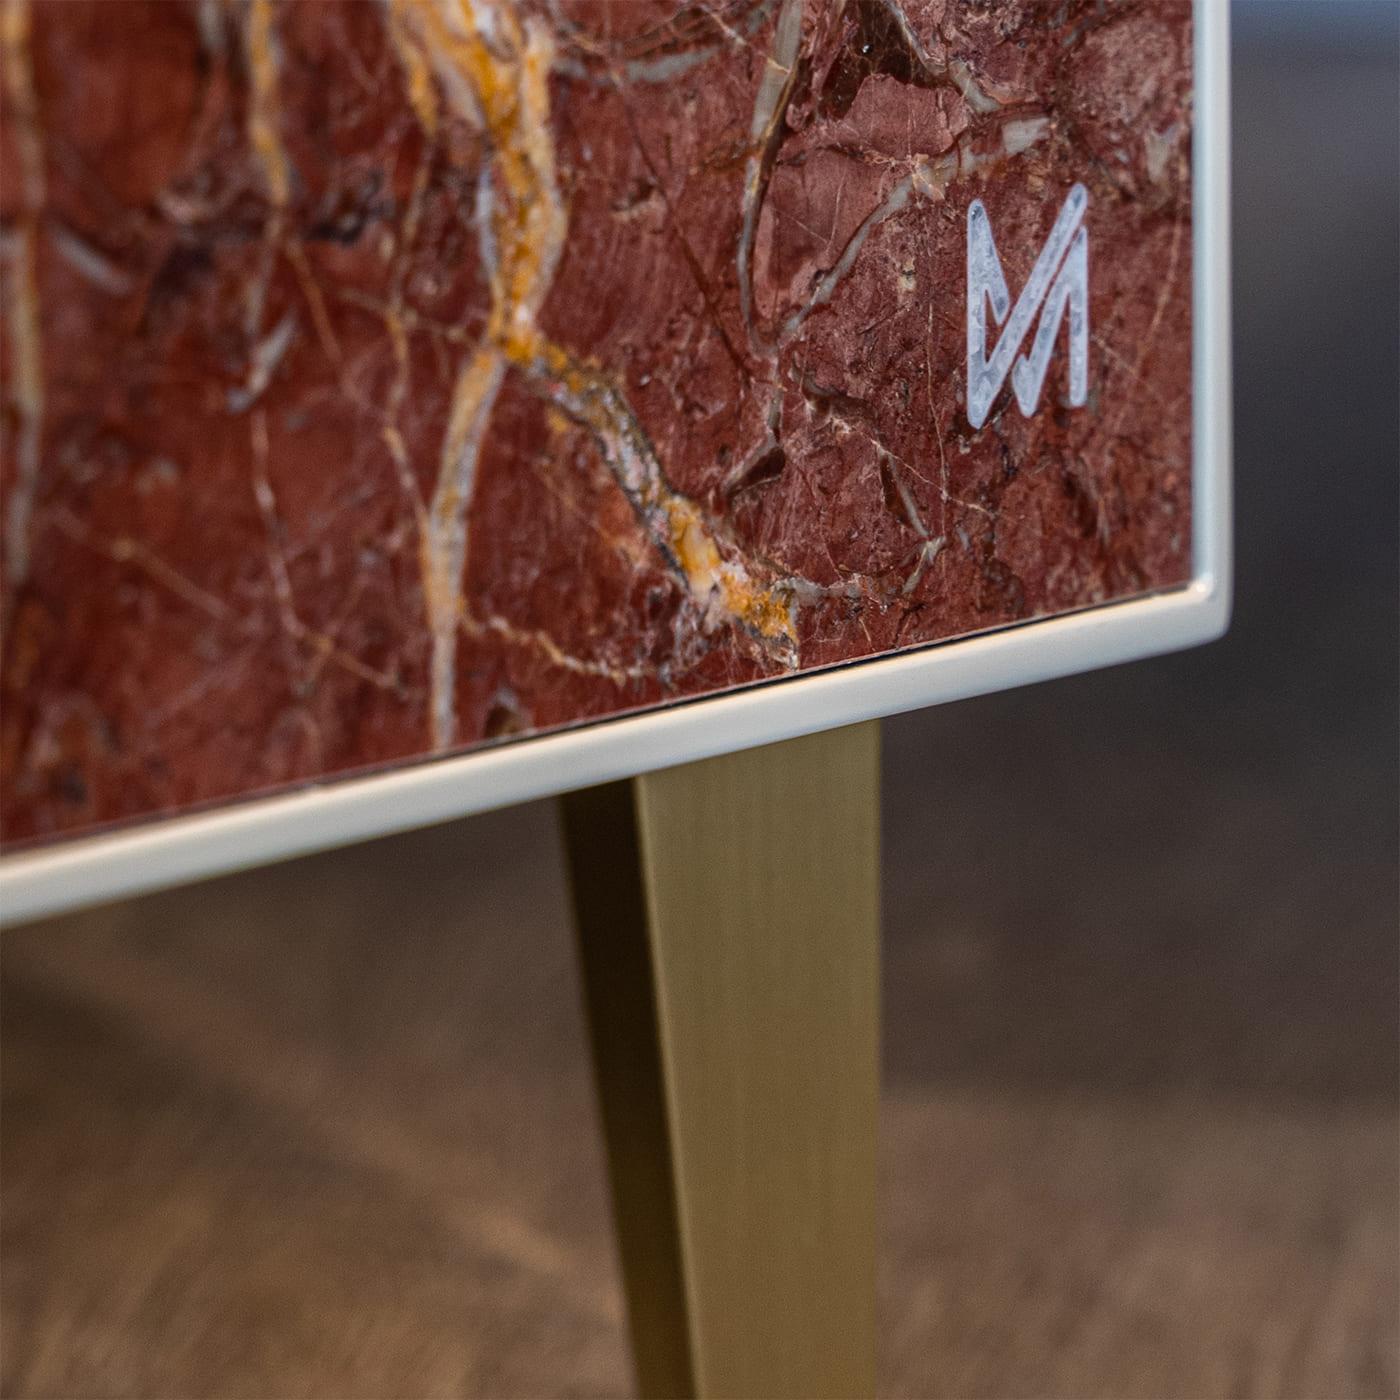 Part of the Marmo Collection by Marzia Boaglio, this Esplosione cabinet will create a dynamic accent in a sophisticated modern interior with its dazzling rose-hued abstract design. Showcasing masterfully crafted marble cone inlays on a rectangular